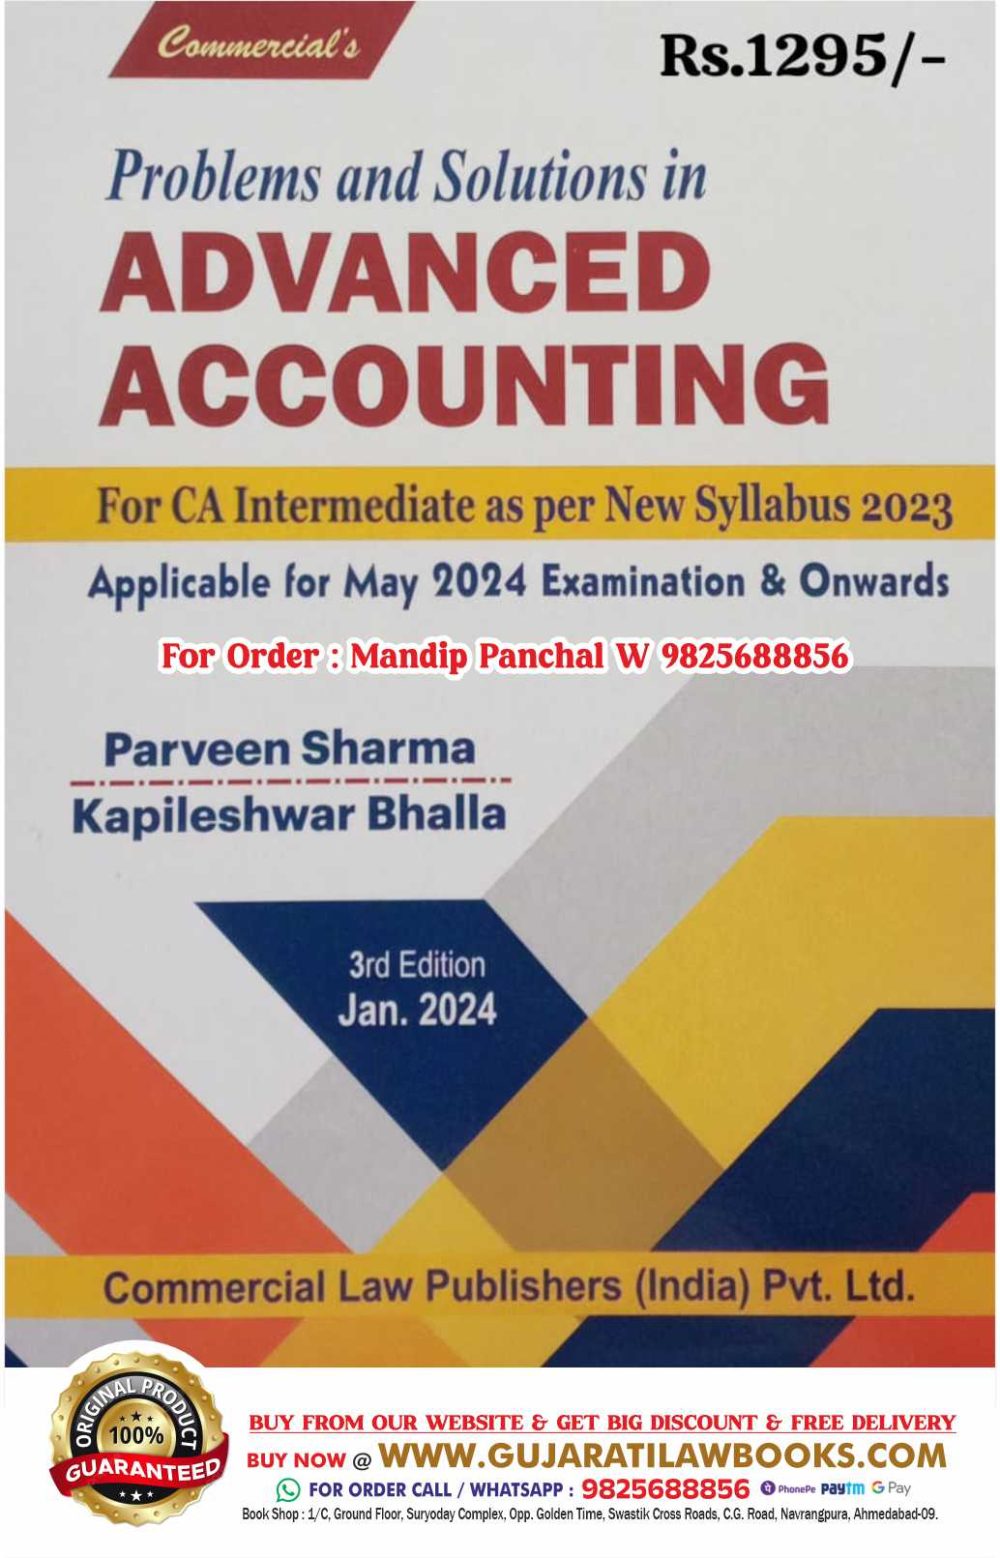 Problems and Solutions in ADVANCED ACCOUNTING For CA Intermediate as per New Syllabus 2023 - For May 2024 and Onwards Examination Latest 3rd Edition January 2024